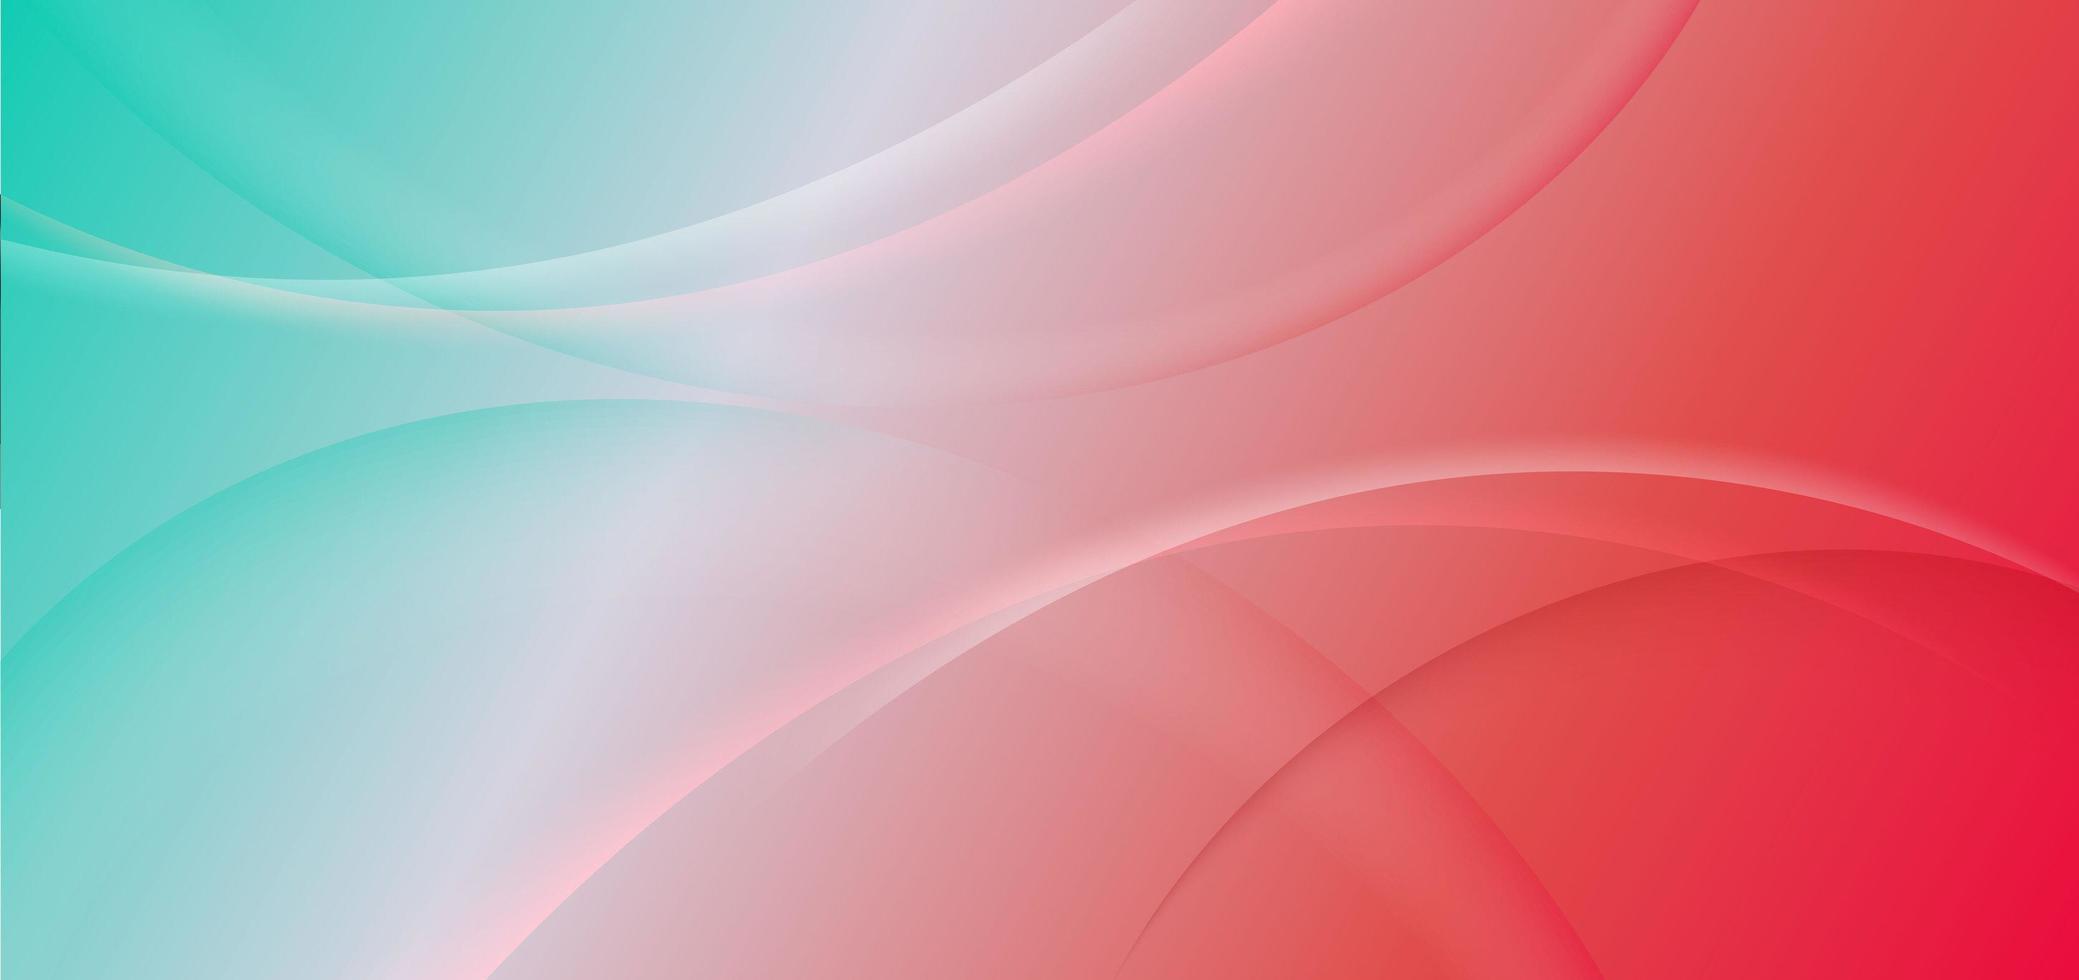 Abstract wave trendy geometric abstract background with soft green and red gradient. vector